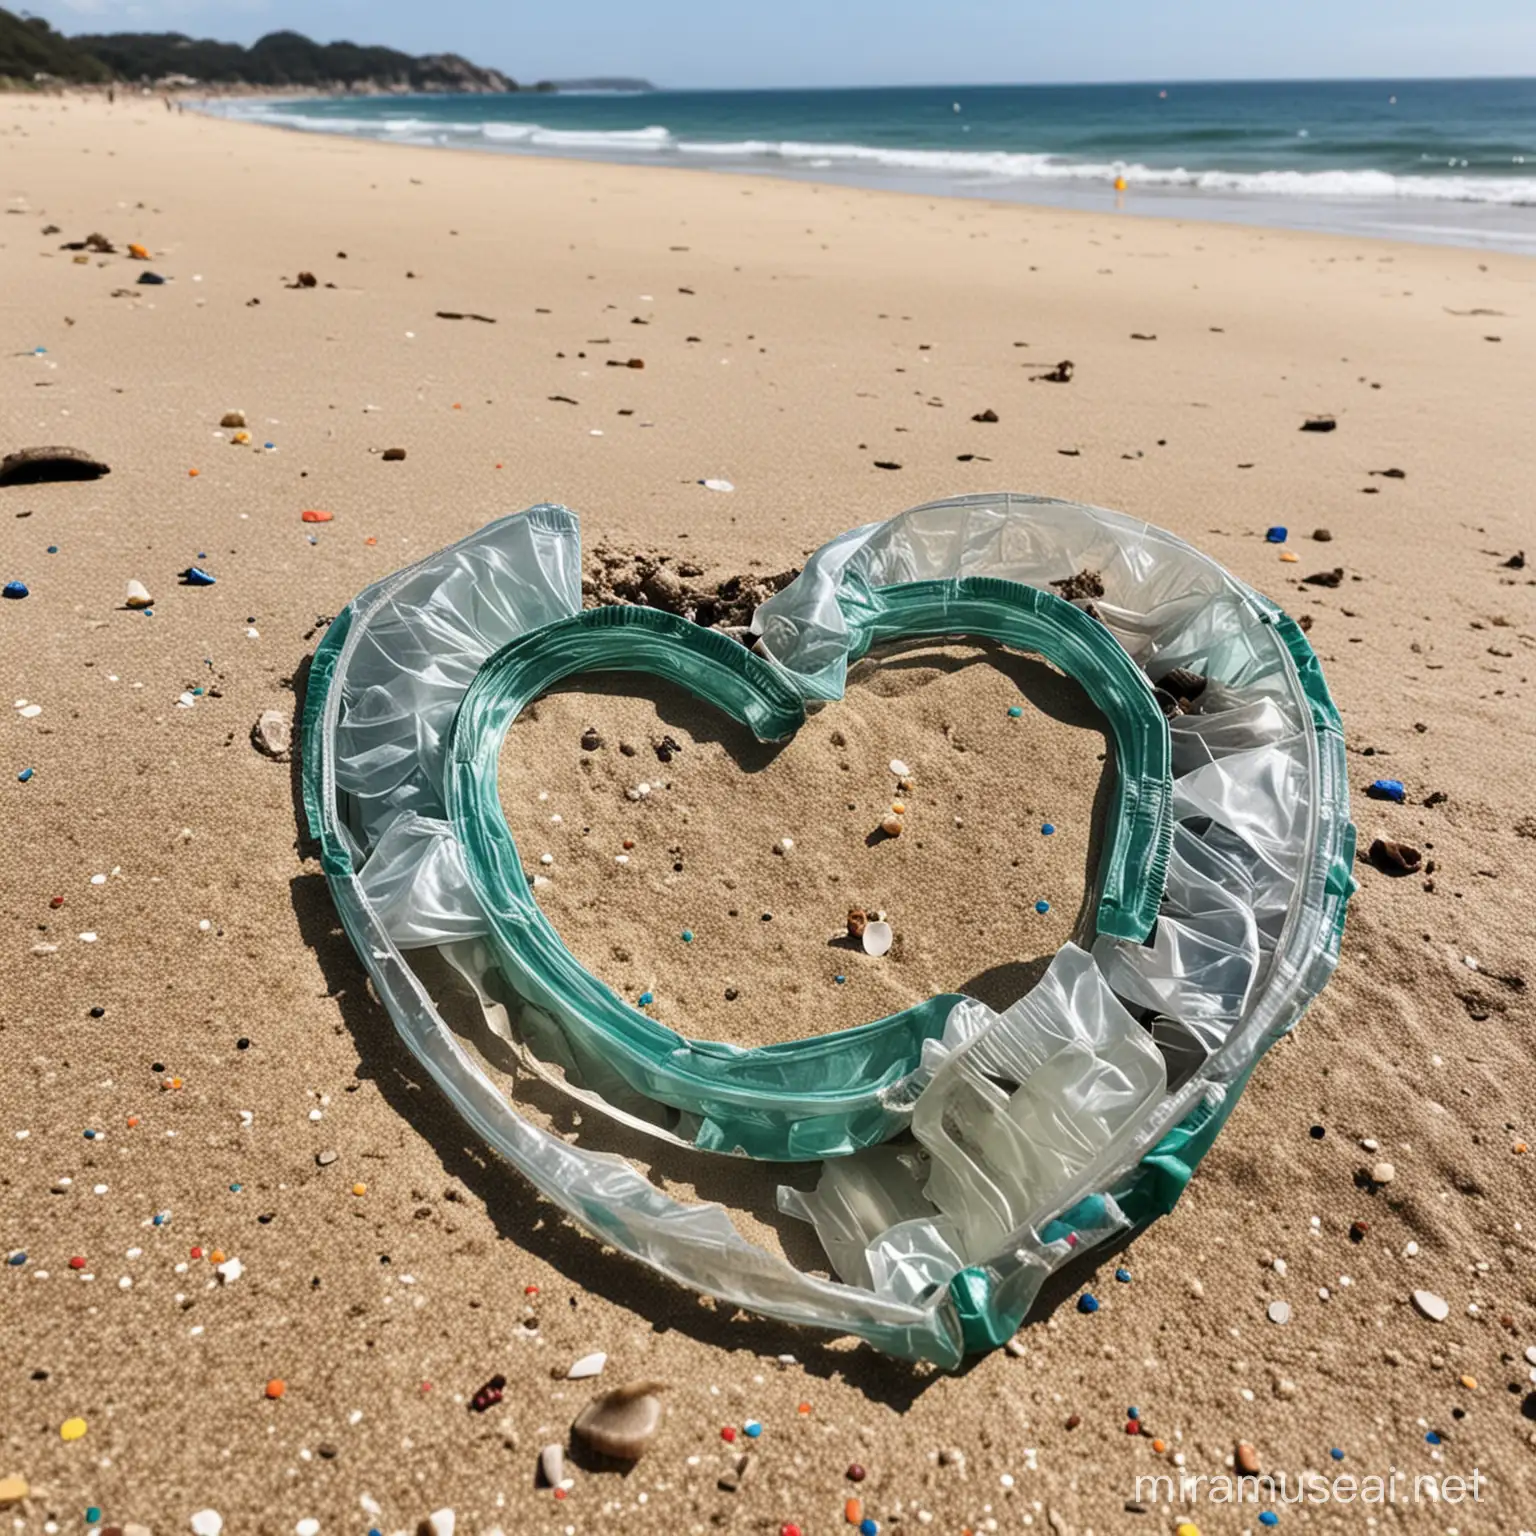 a instagram post about recycling plastics in beach
